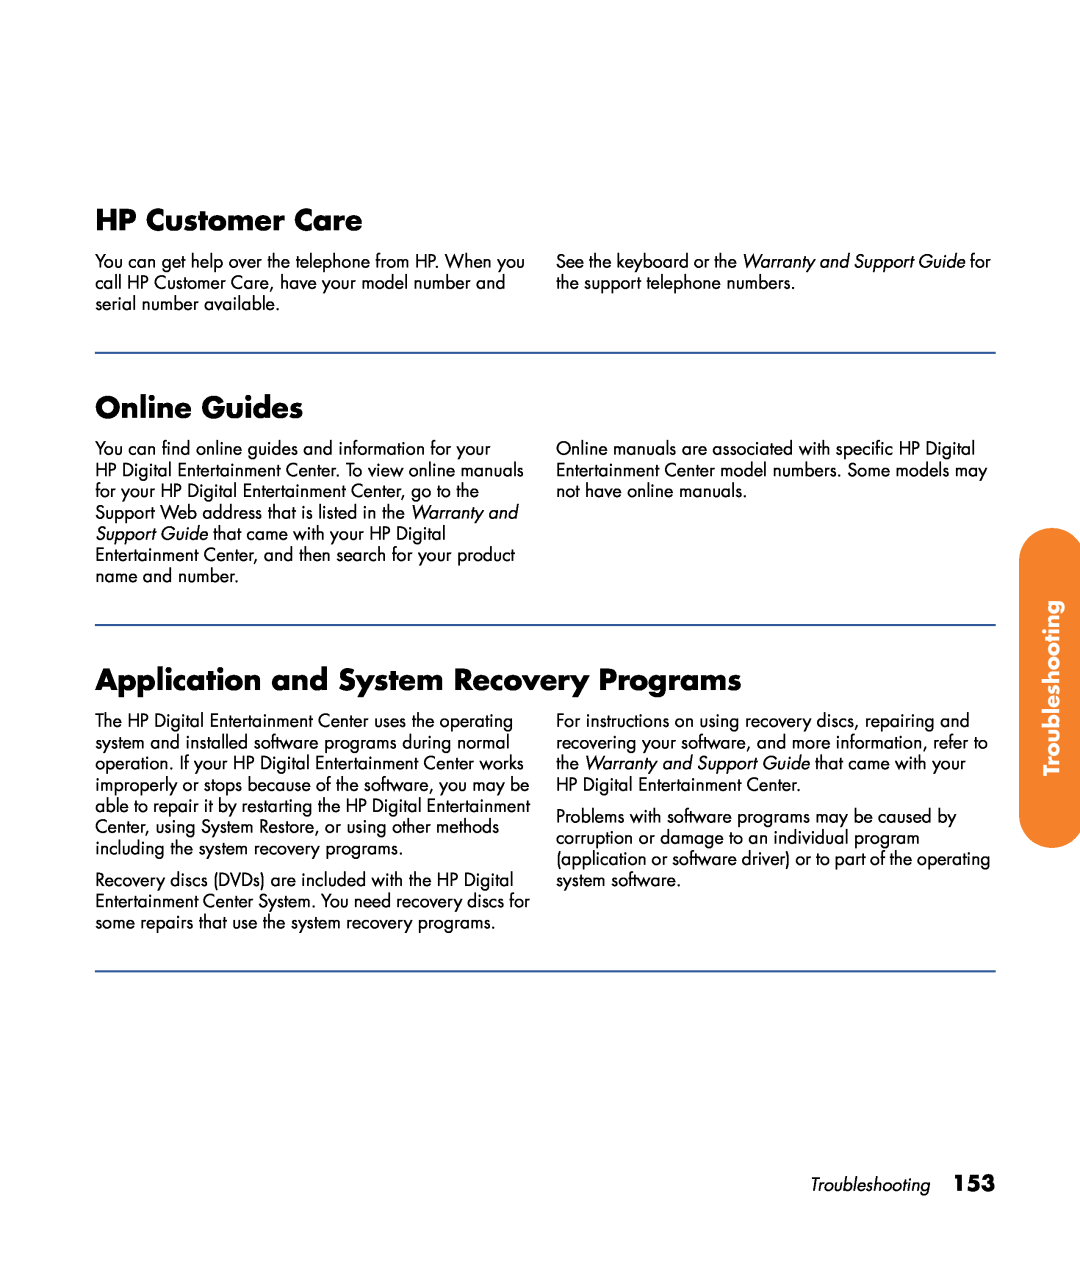 HP z540, z557, z555, z552, z545 HP Customer Care, Online Guides, Application and System Recovery Programs, Troubleshooting 